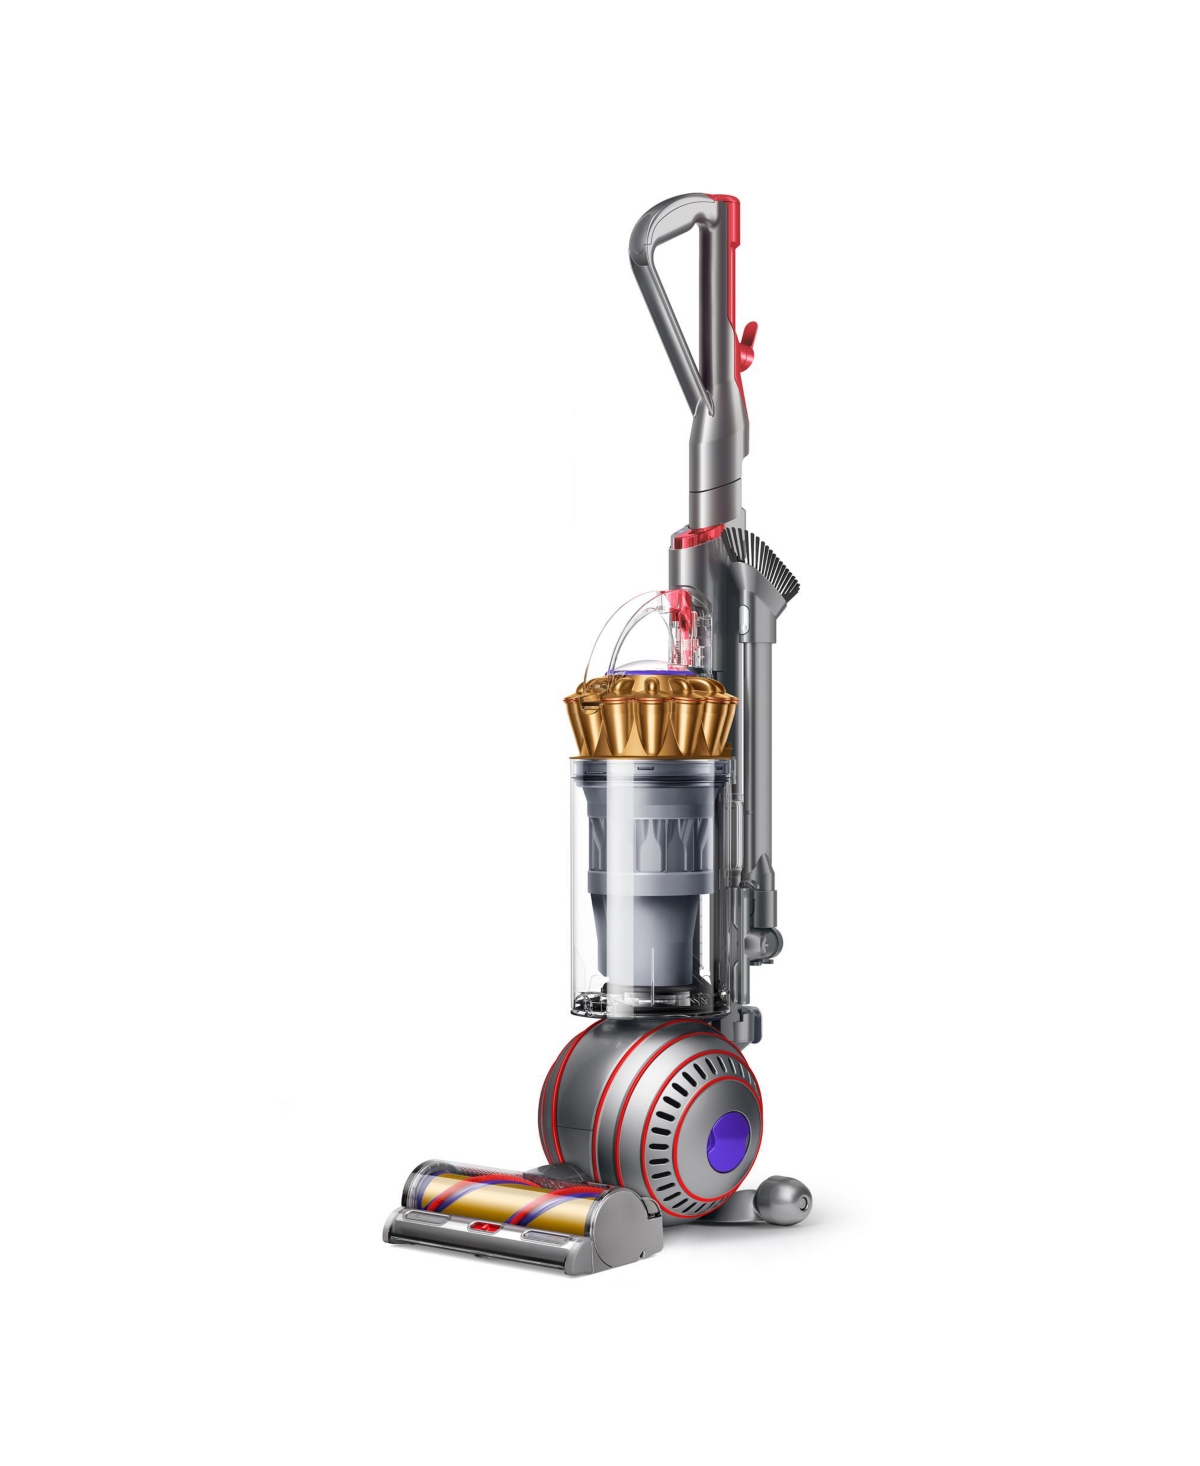 Ball Animal 3 Complete Upright Vacuum - Gold - Gold